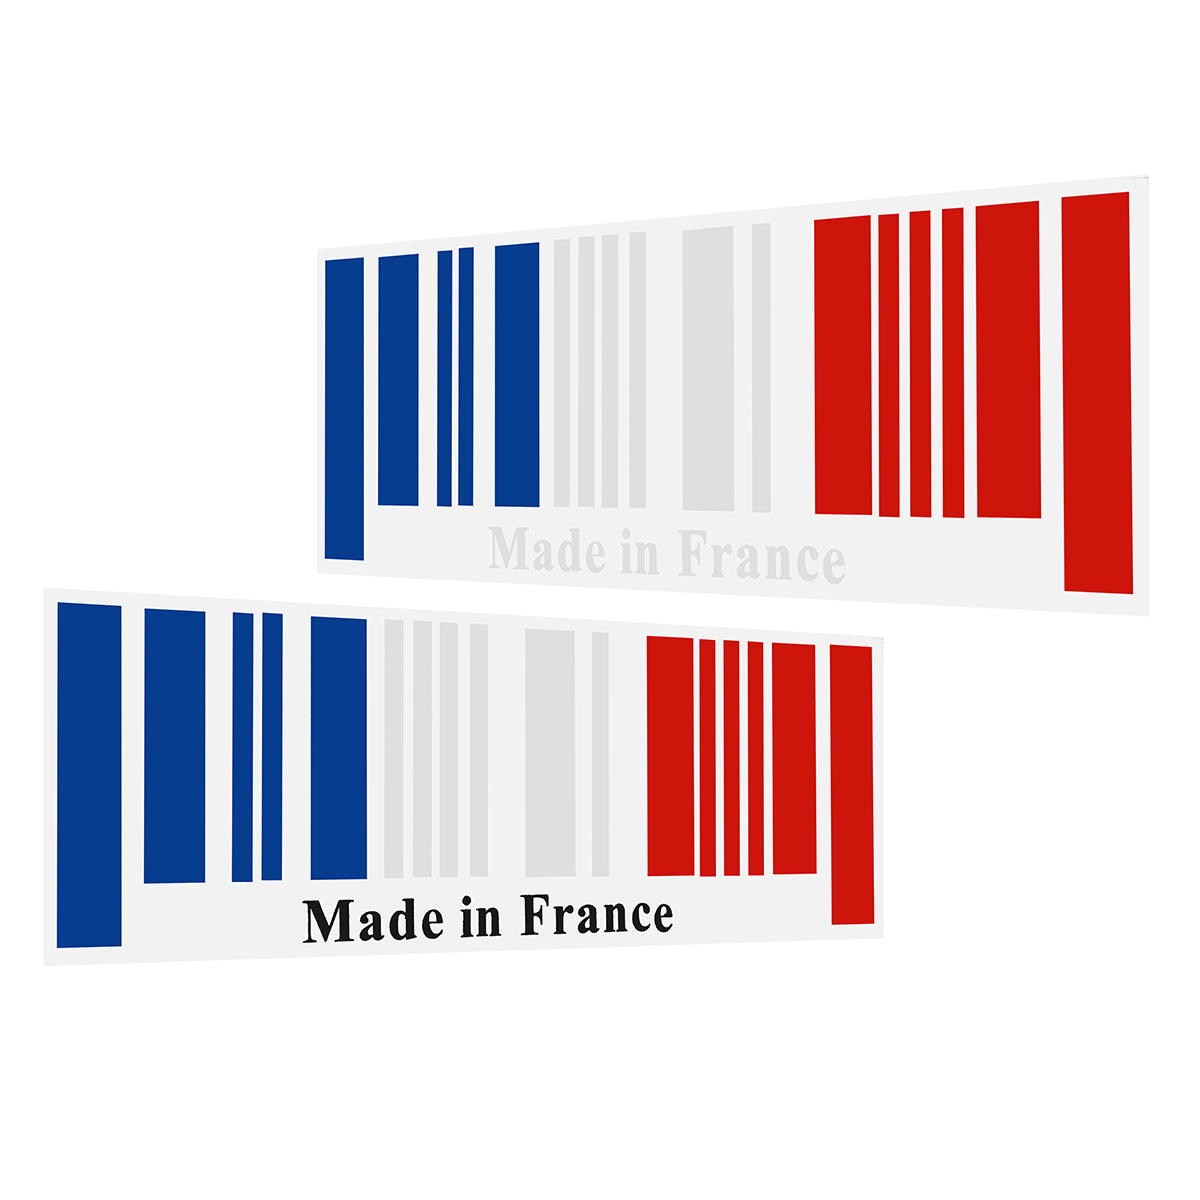 Firebrick 25x9cm PVC Car Made In France Bar Code Stickers Graphic Decal Decoration Universal